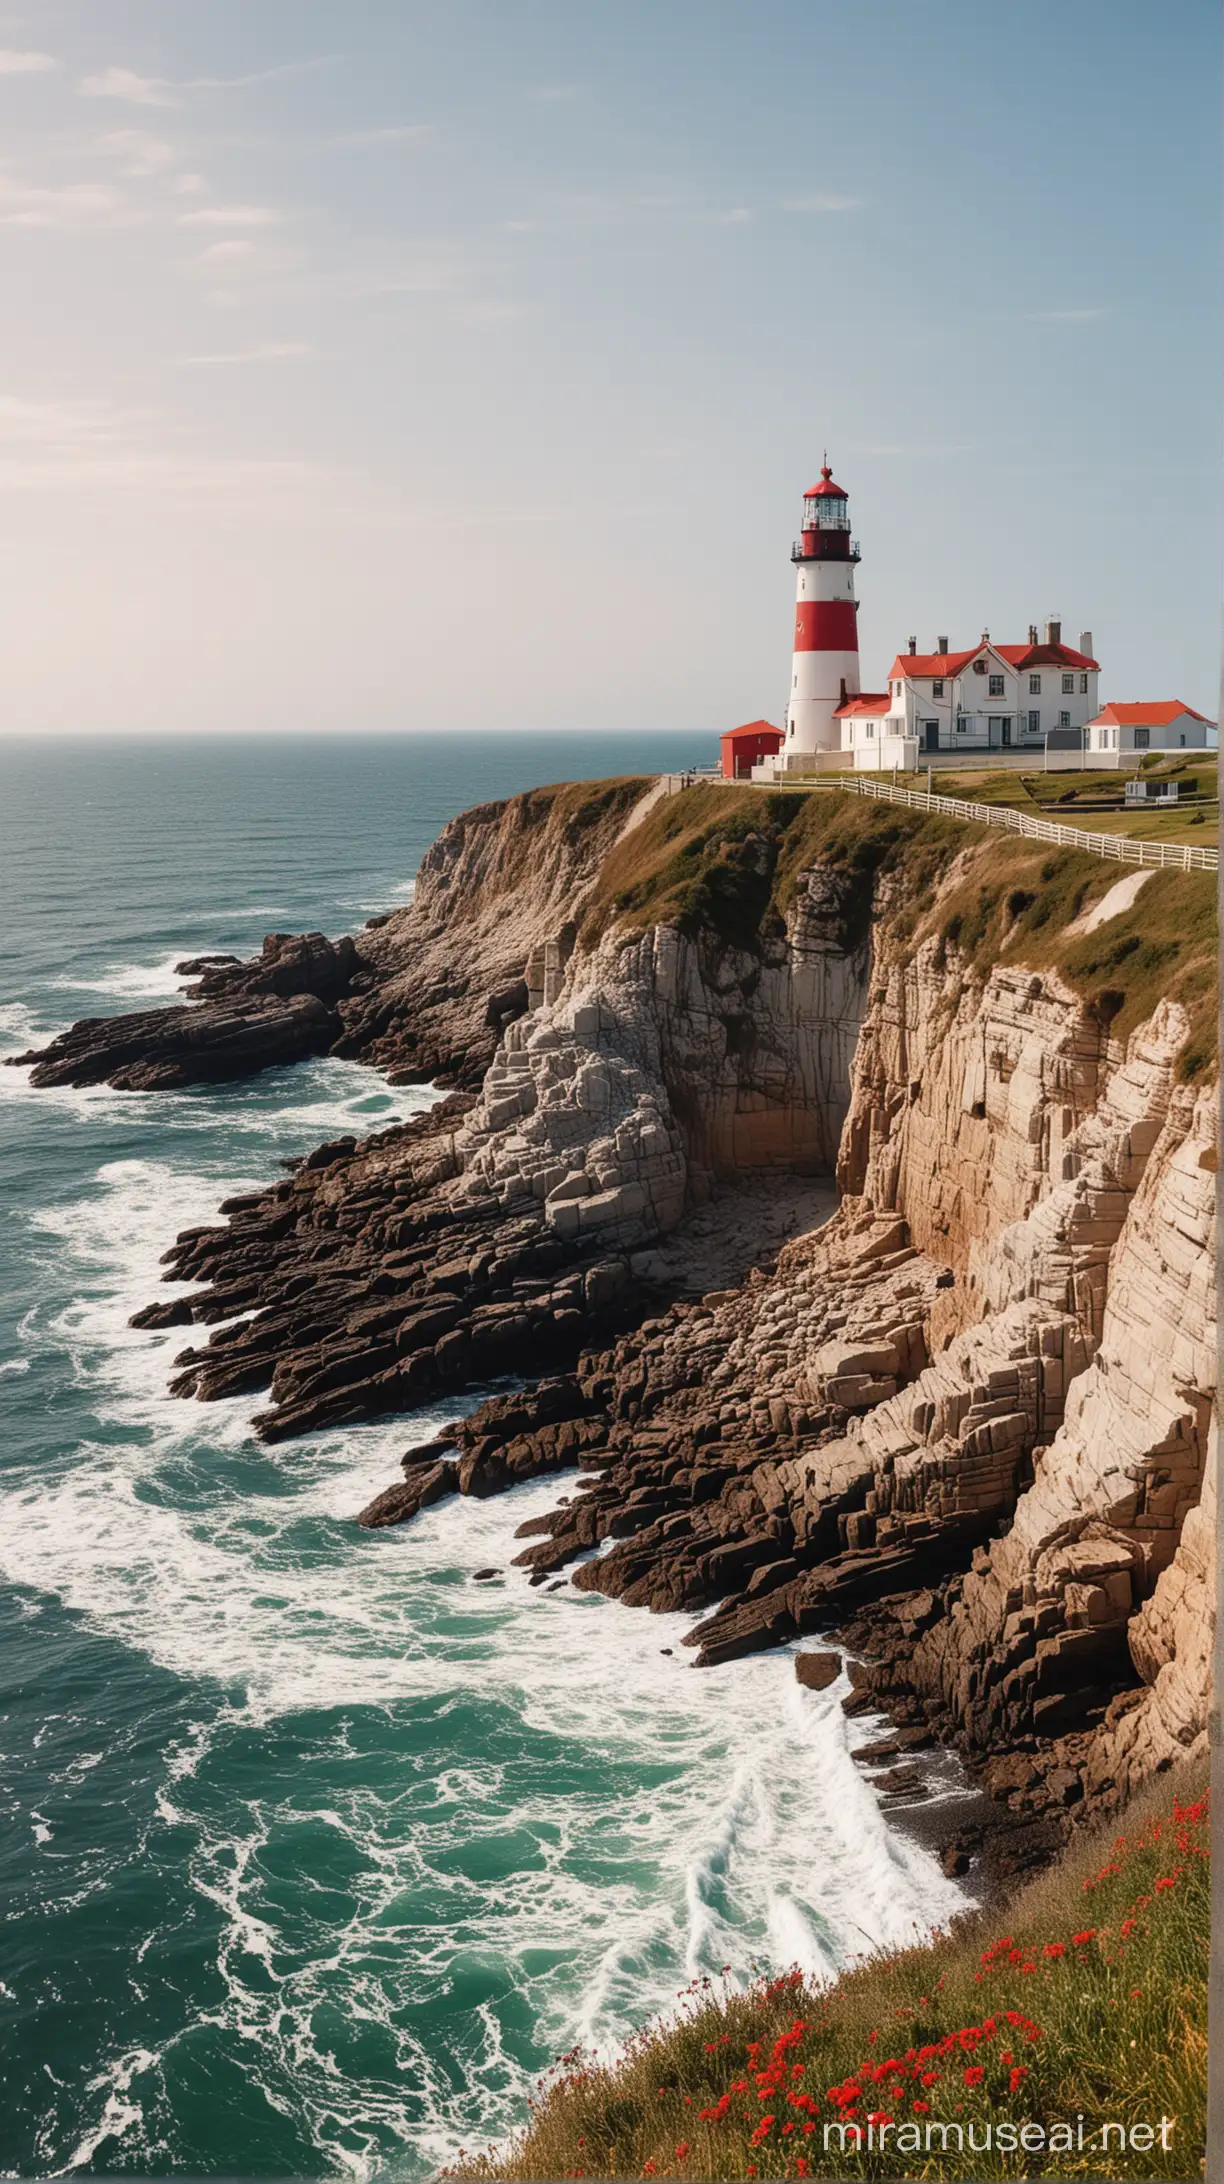 A lighthouse on the cliff by the sea. Beautiful weather during the day. The lighthouse is striped in white and red and is in the right half of the picture.